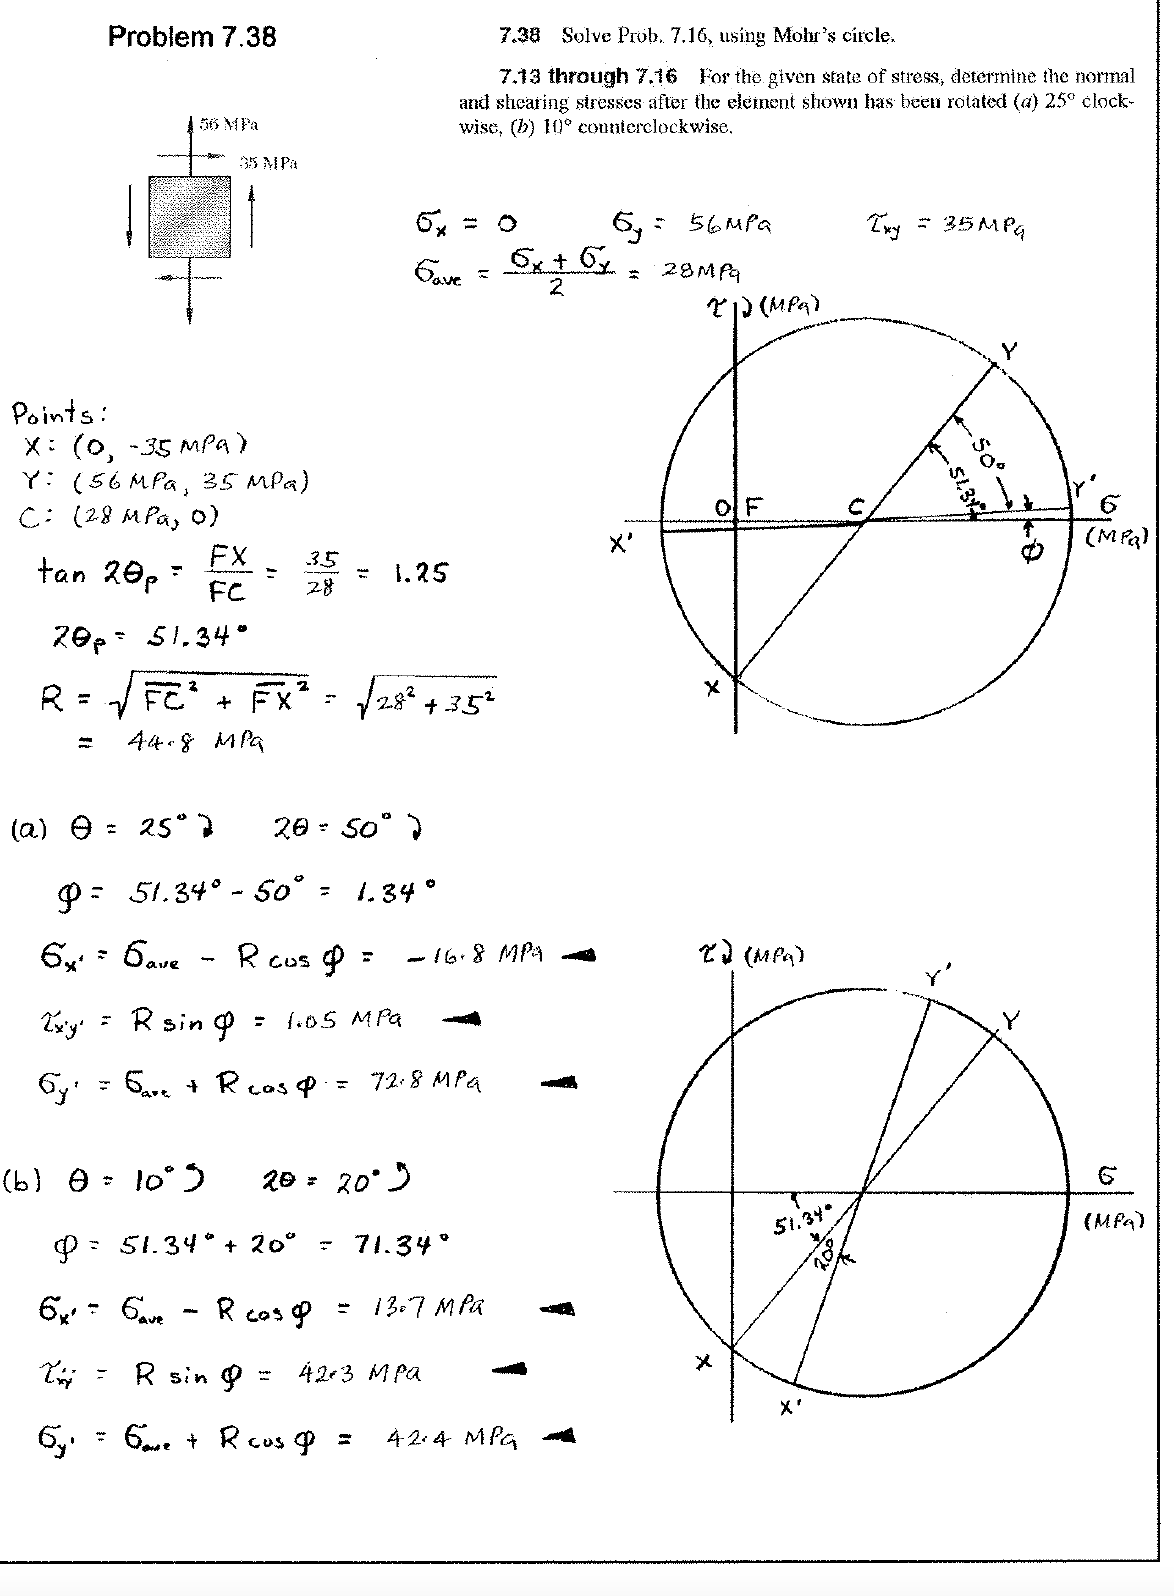 Problem 7.38
7.38 Solve Prob. 7.16, using Molr's circle.
7.13 through 7.16 For the given state of stress, determine the normal
and shearing stresses after the eleiment shown has been rotated (a) 25° clock-
wise, (b) 10° connterclockwise,
56 MPa
35 MPa
6x =
6,: 56MPA
35 MPG
Gave
6xt
2
28M Pa
Points:
X: (0, -35 Mpa)
Y: (56 MPa, 35 MPa)
C: (28 MPa, o)
ol F
X'
(MPa)
FX
tan 20p-
FC
35
1.25
28
20p- 51,34*
R = FE + Fx* - f2s* + 35*
44.8 M PG
(a) e :
25° )
20 - So° )
9: 51.34° - 50° = 1.34°
6, : 6ave
R cus 9
- 16.8 MPA -
: Rsin 9
= {.0S MPa
6y: - 5e + Rcos p = 72.8 MPa
(b) 0 = lo° )
20 = 20°)
51.34
(MPa)
: 51.34° + 20°
- 71.34°
- 13.7 MPa
R sin 9
423 M Pa
X'
6, : 6. + R cus g =
42: 4 MPa
CuS
- So°.
